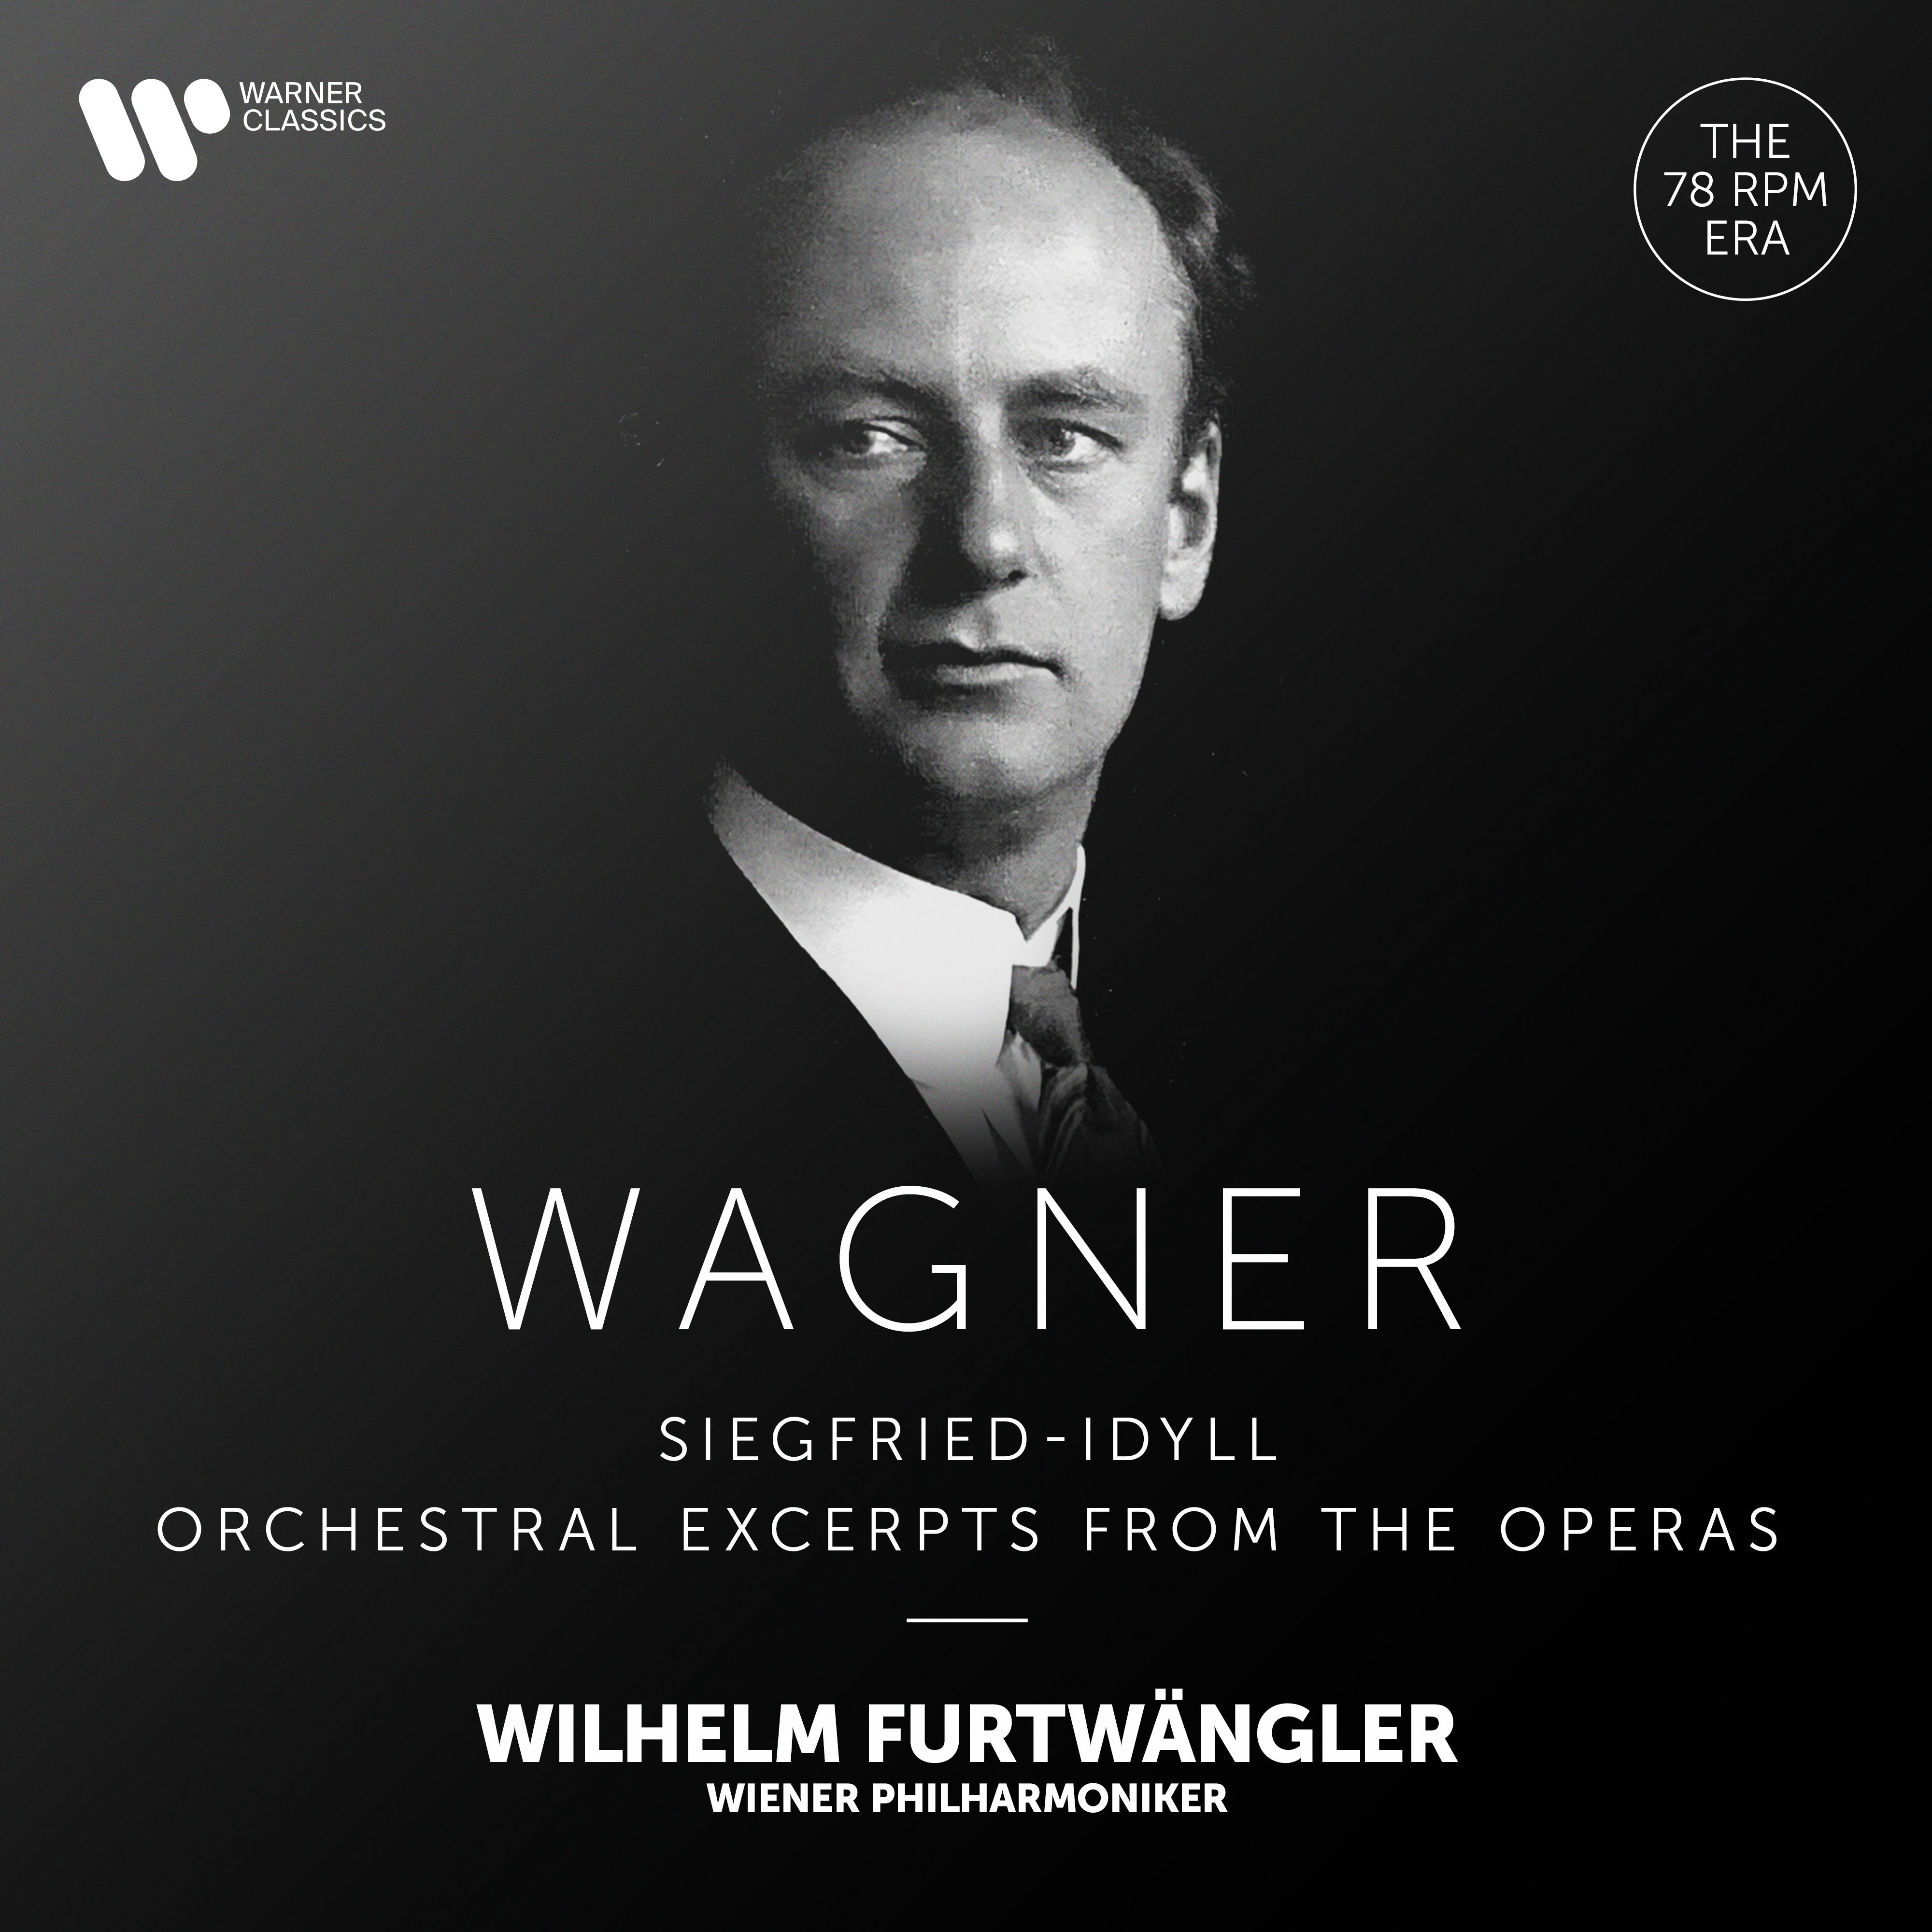 Wagner- Siegfried-Idyll & Orchestral Excerpts from the Operas